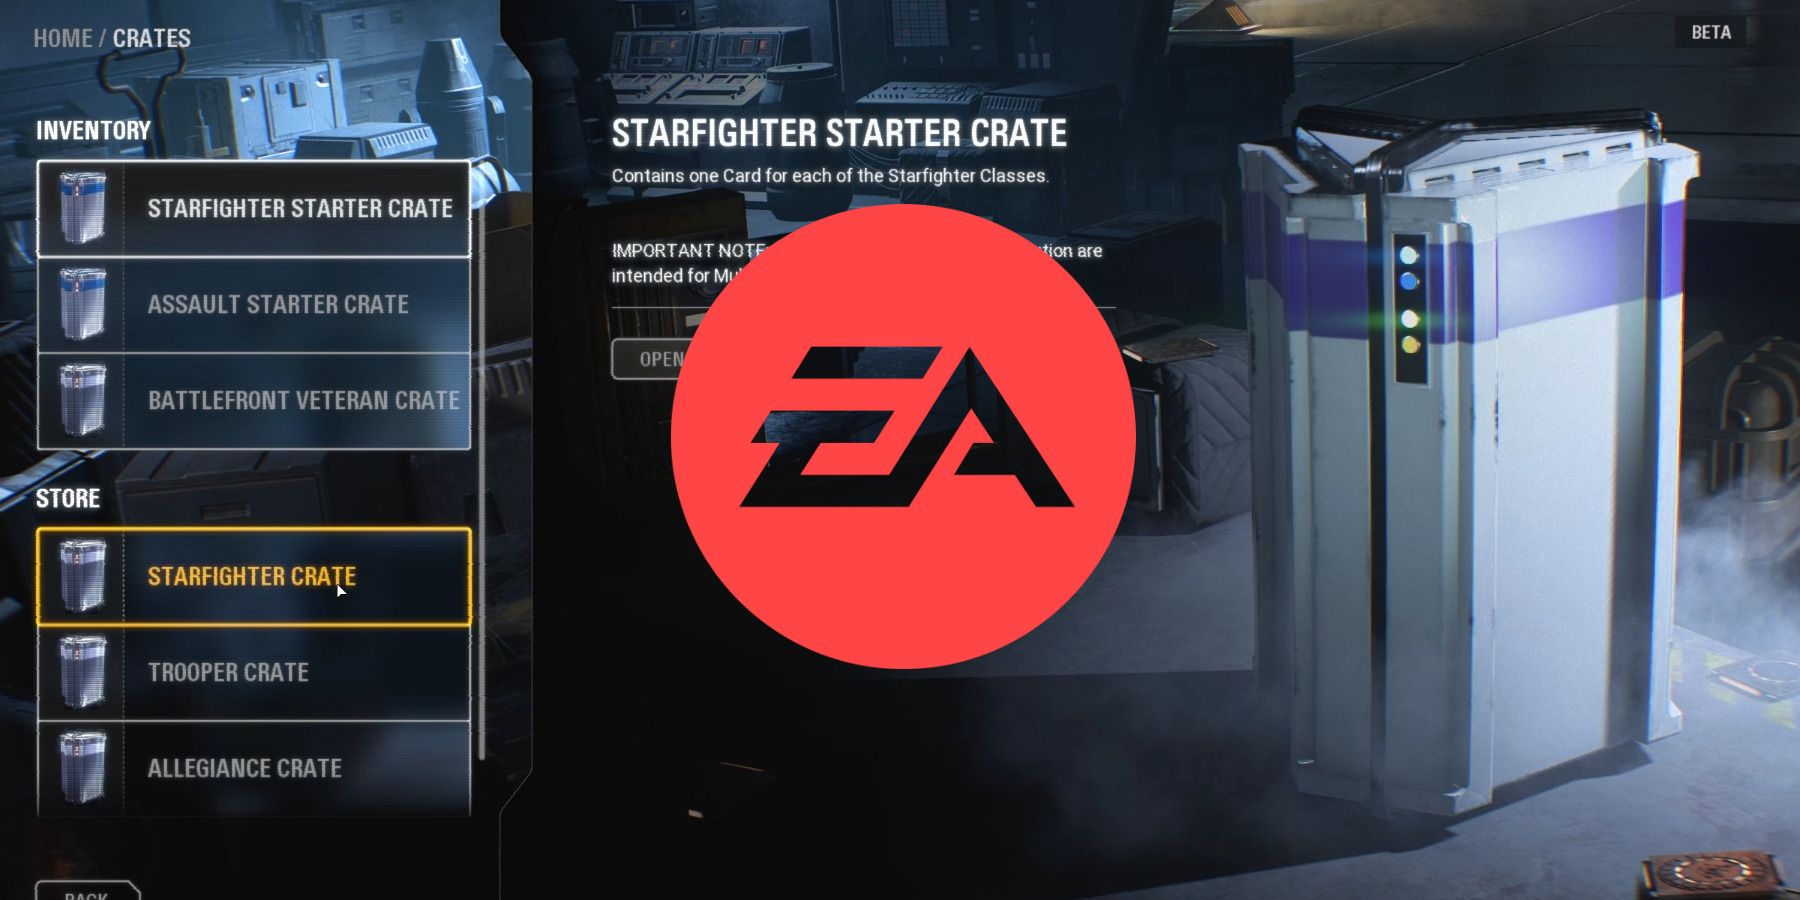 EA Adds Loot Box System To Skate Beta